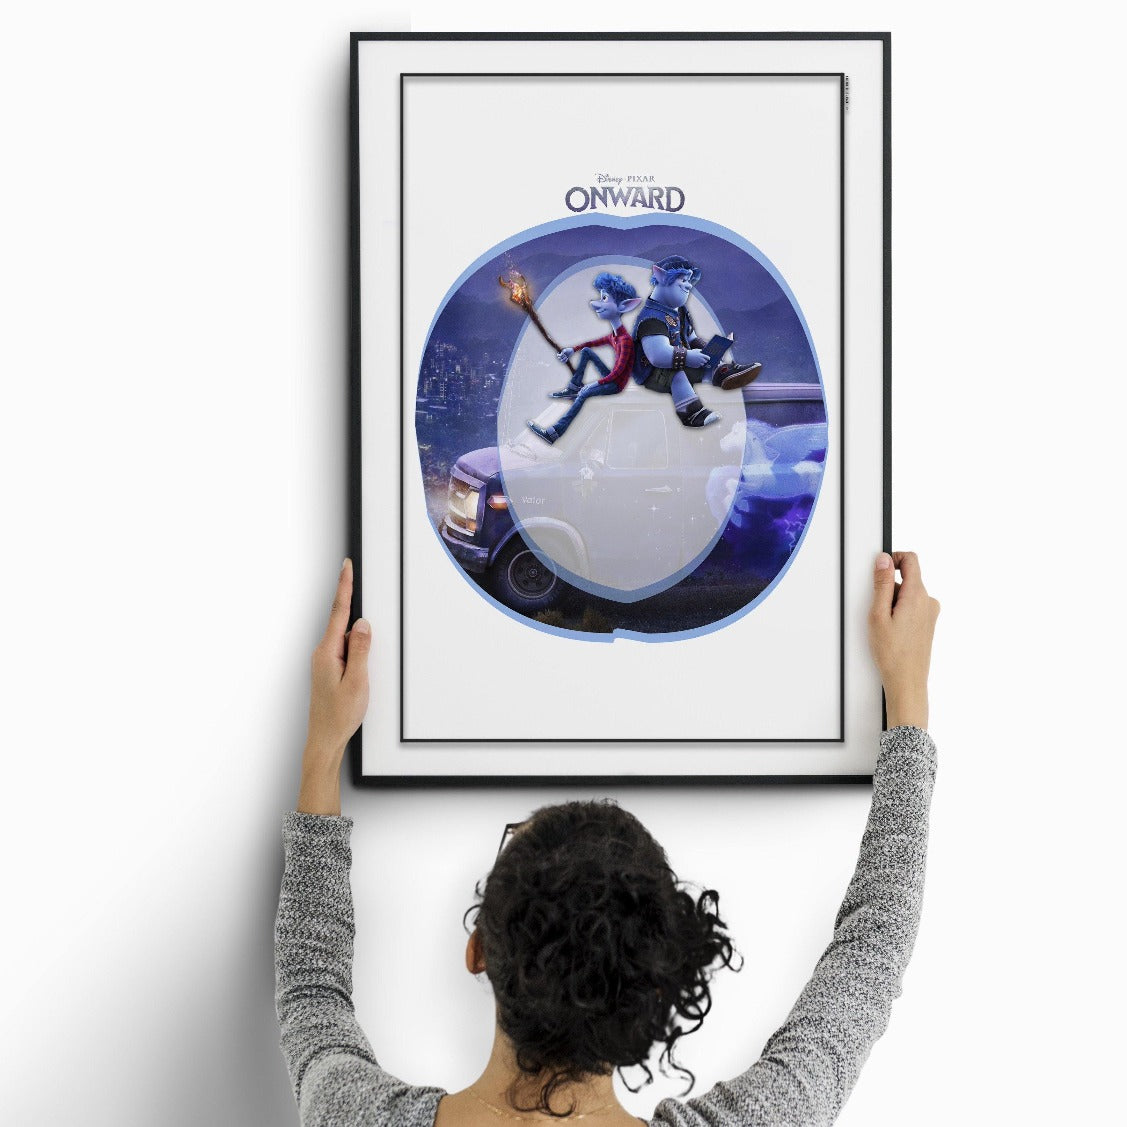 Discover all of your favourite Disney heroes with Onward Movie Poster. Featuring characters from classic Disney movies, these iconic wall prints make it easy to celebrate the power of Disney magic. Perfect for any room wall, these fine art prints come in a variety of designs and vibrant colors, making them a timeless piece to hang. Collect them all! 98types